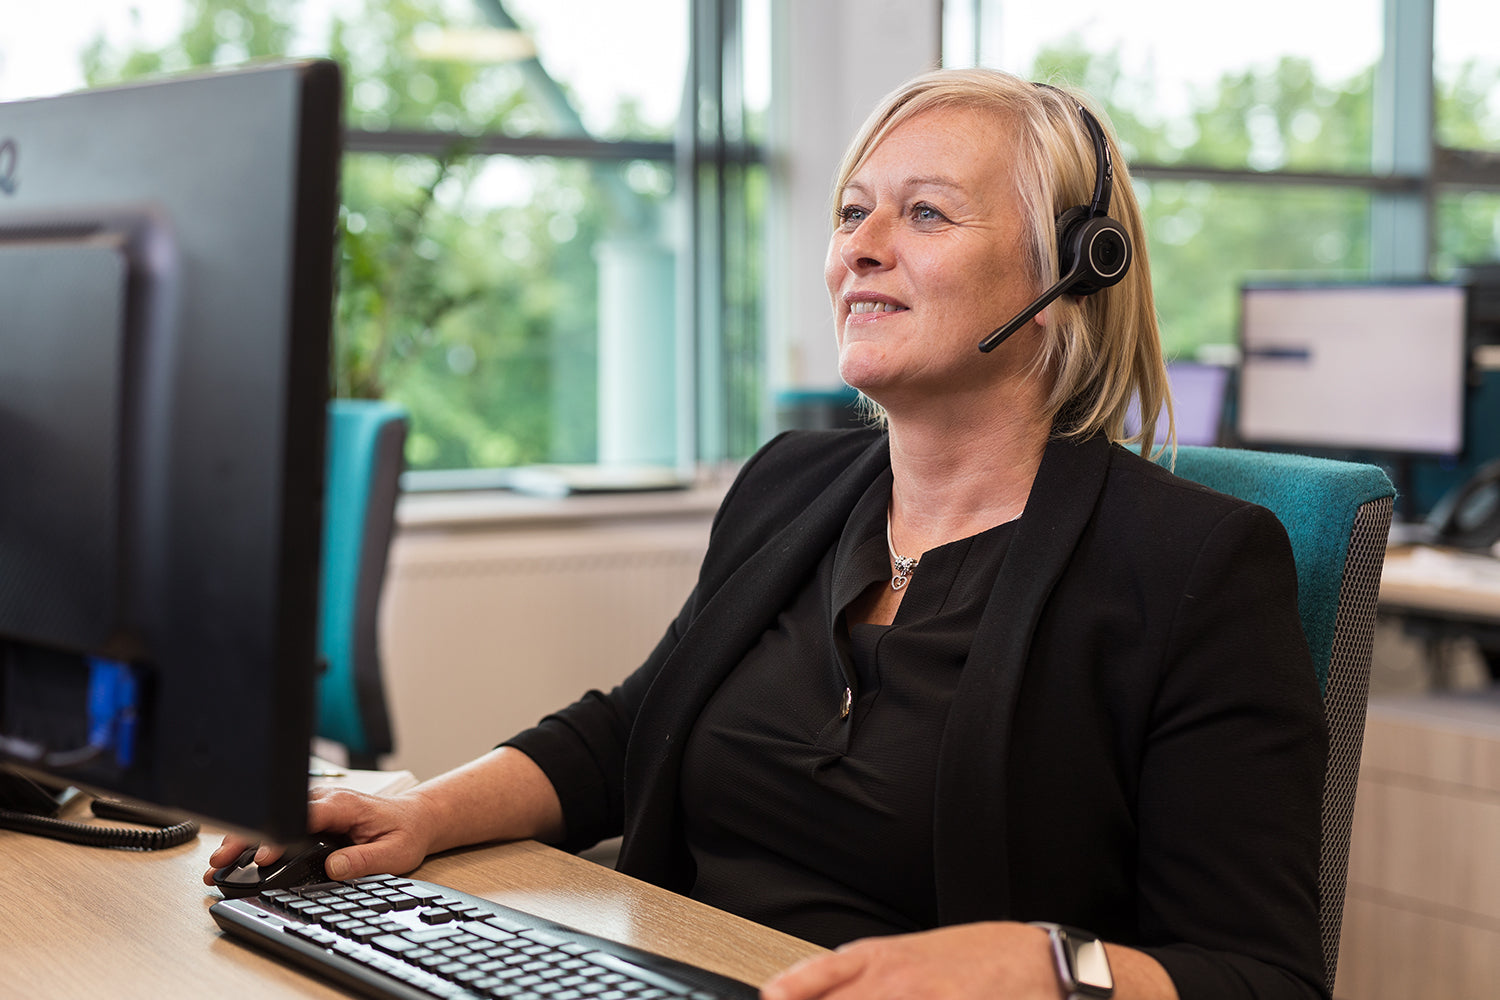 Female customer advisor with blonde hair, wearing a headset and sitting at the computer.